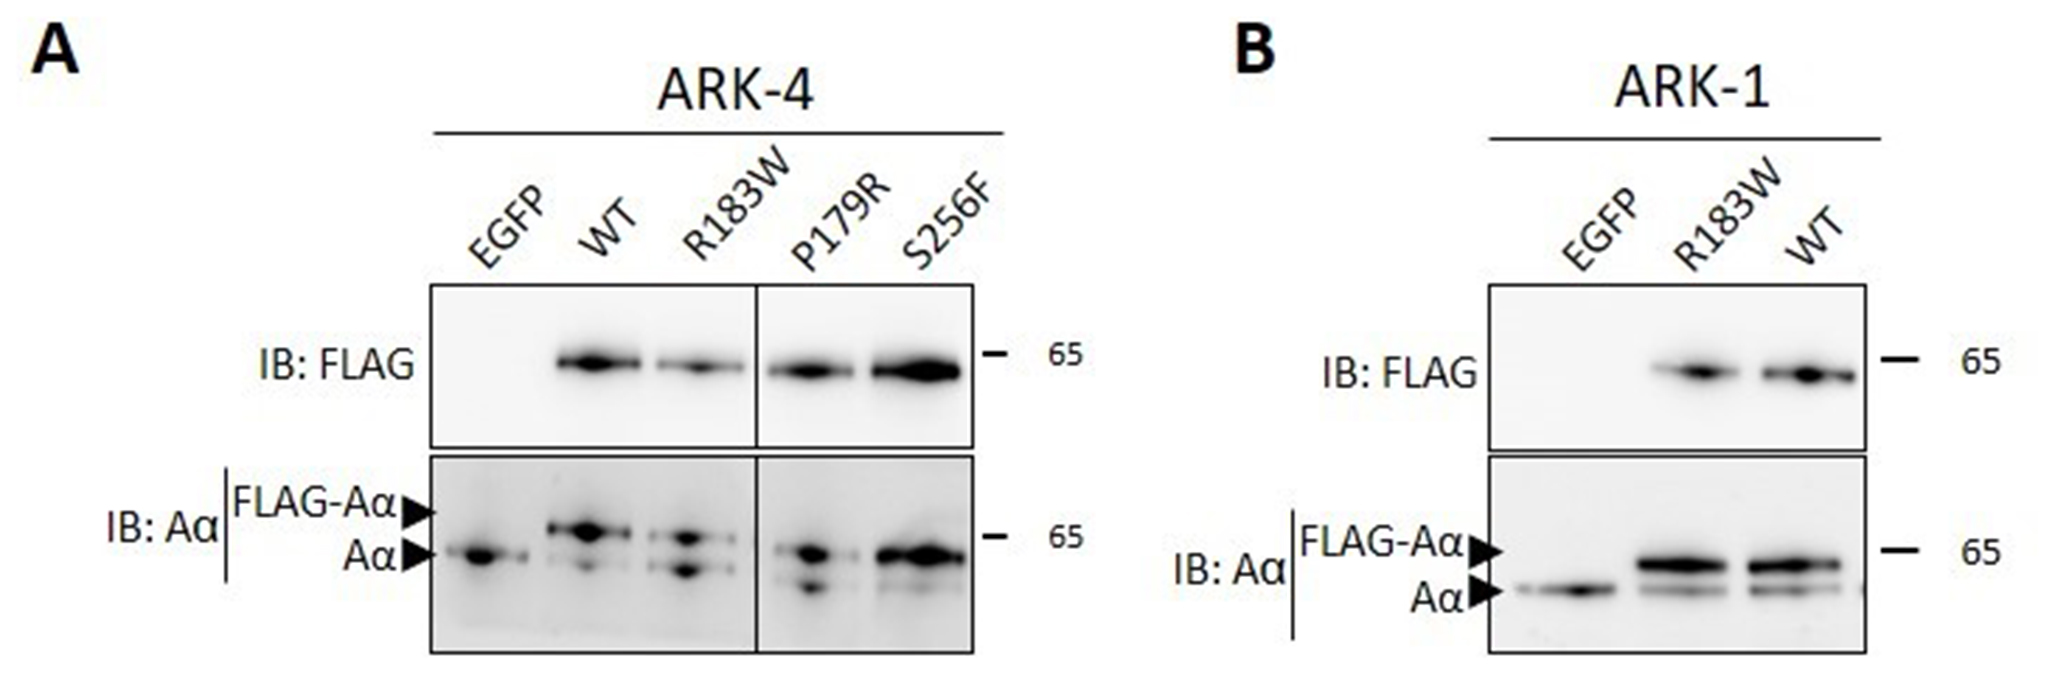 The PPP2R1A cancer hotspot mutant p.R183W increases clofarabine resistance in uterine serous carcinoma cells by a gain-of-function mechanism